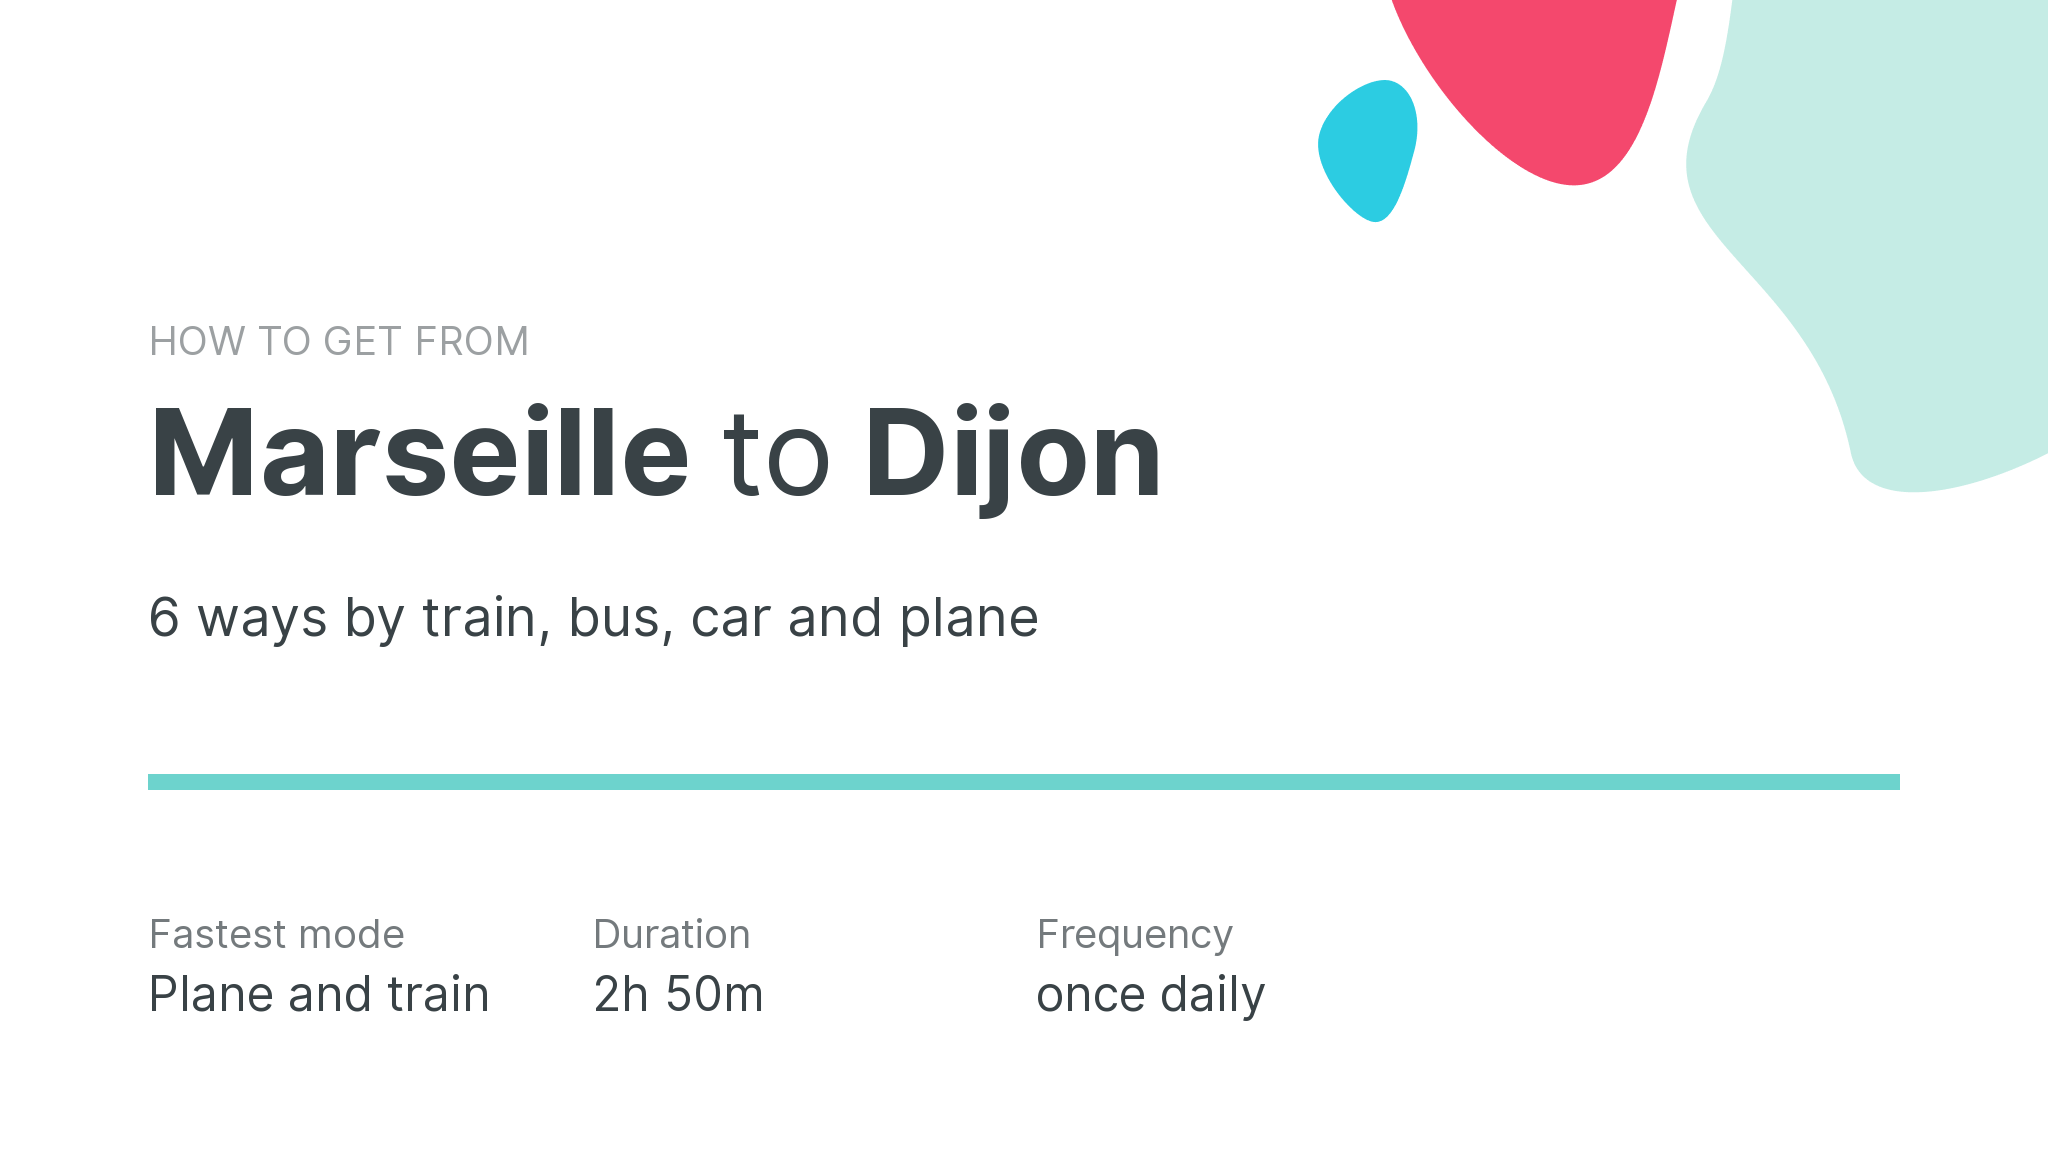 How do I get from Marseille to Dijon